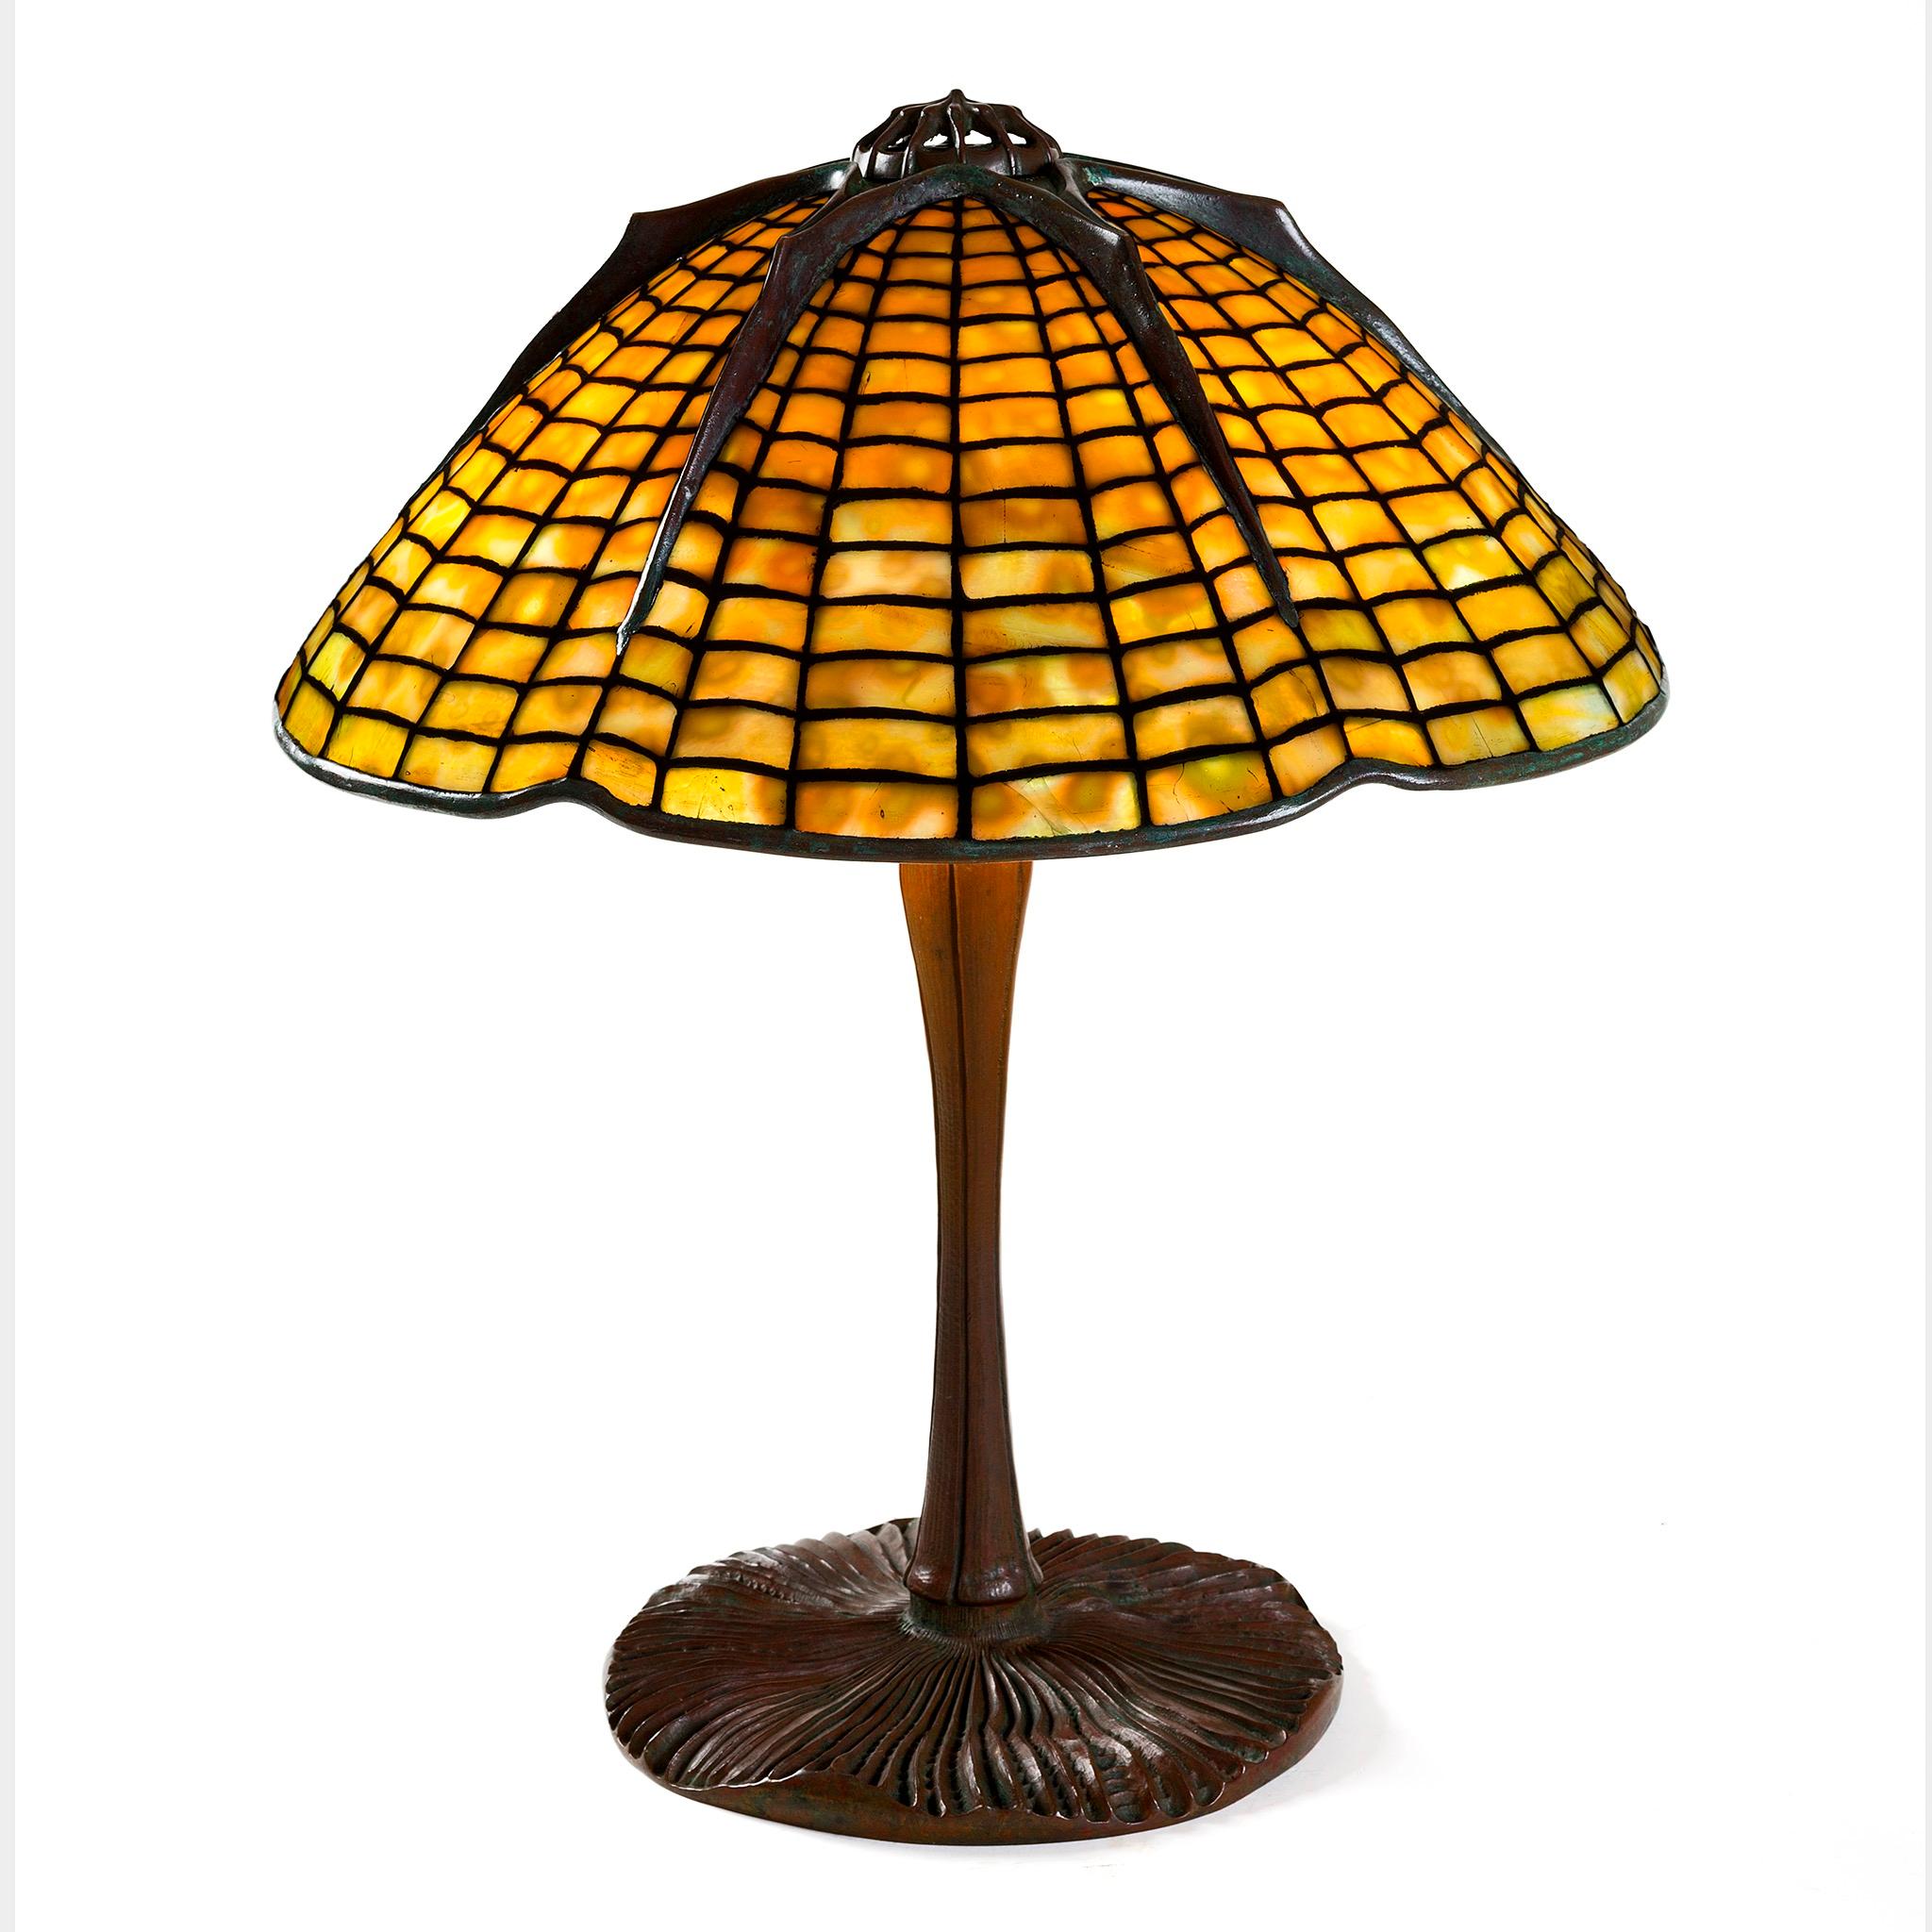 This Tiffany Studios New York glass and bronze “Spider” table lamp features a mottled golden glass shade of undulating golden hues, atop a patinated bronze “Inverted Mushroom” base. With Gothic, arachnid-type raised veins spreading from the clawed